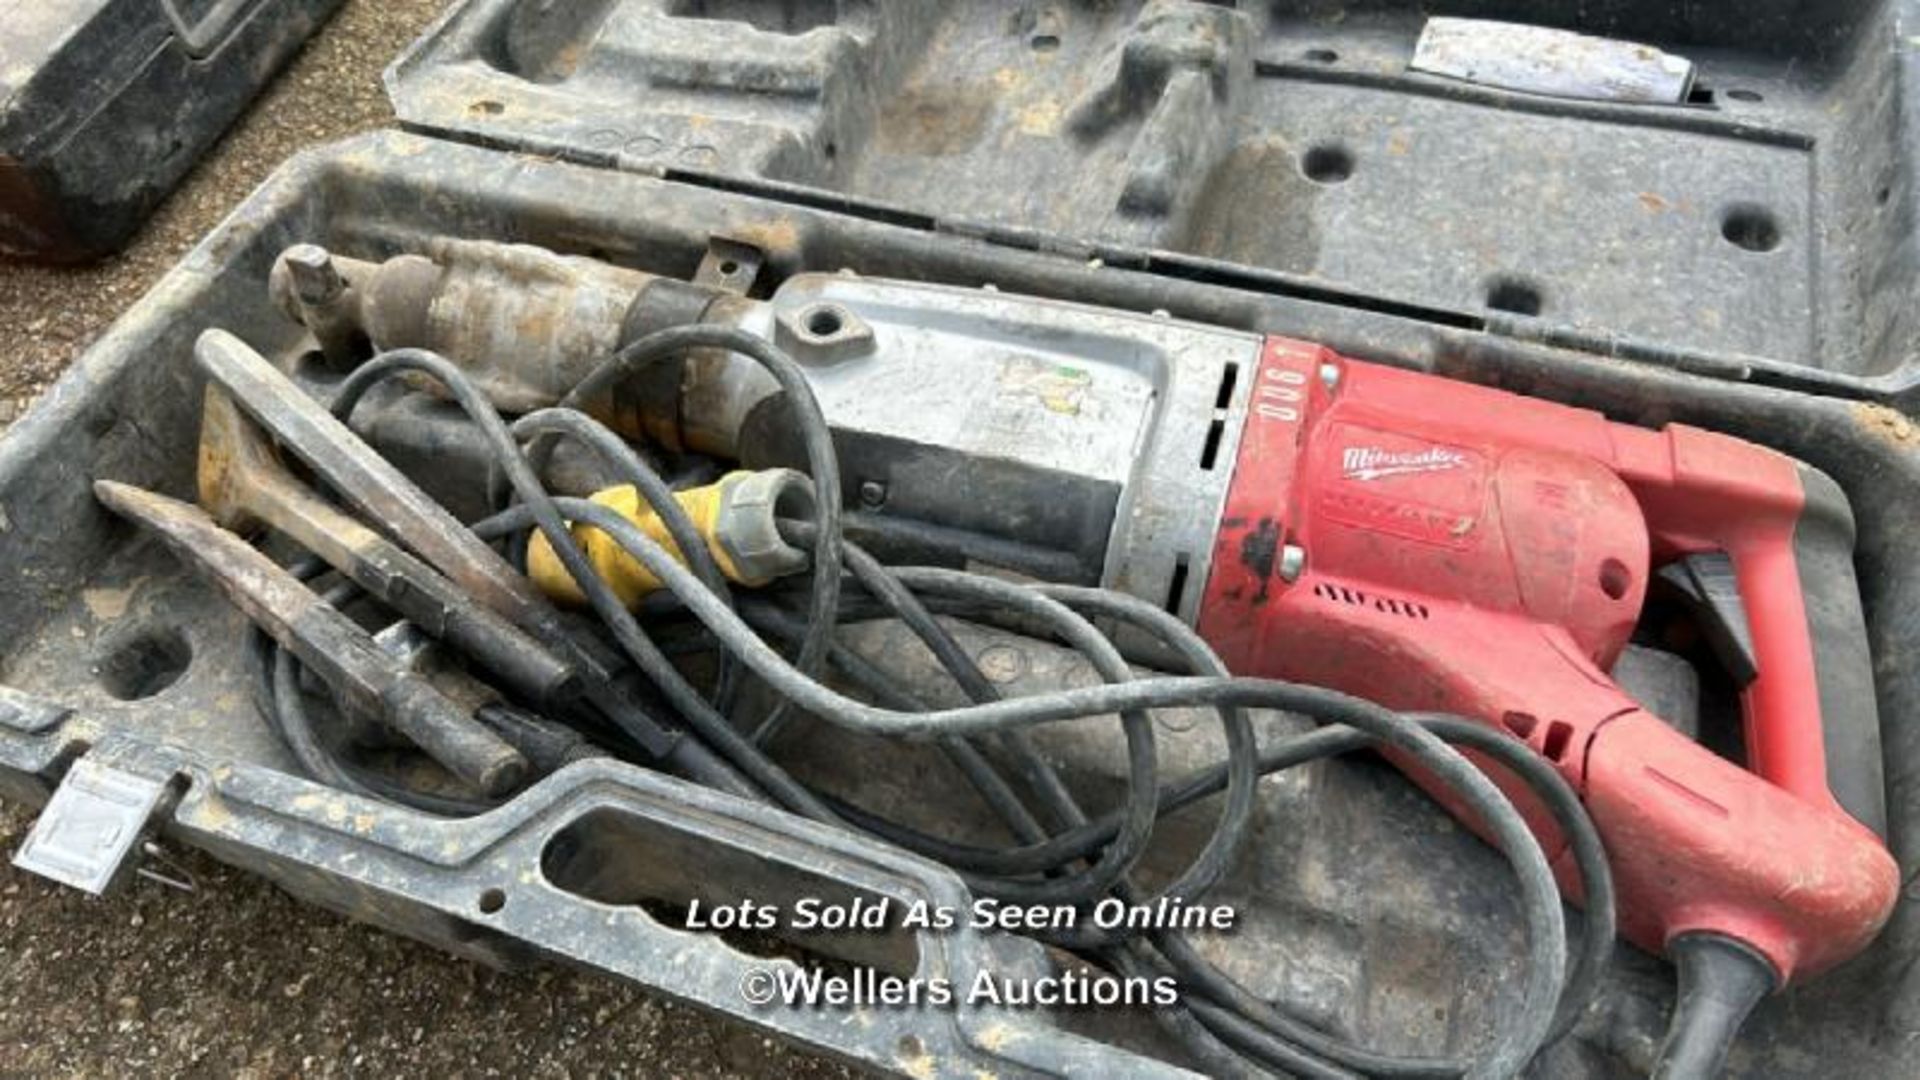 MILWAUKEE K900 110V HEAVY BREAKER WITH BITS, WITH CASE - Image 2 of 5